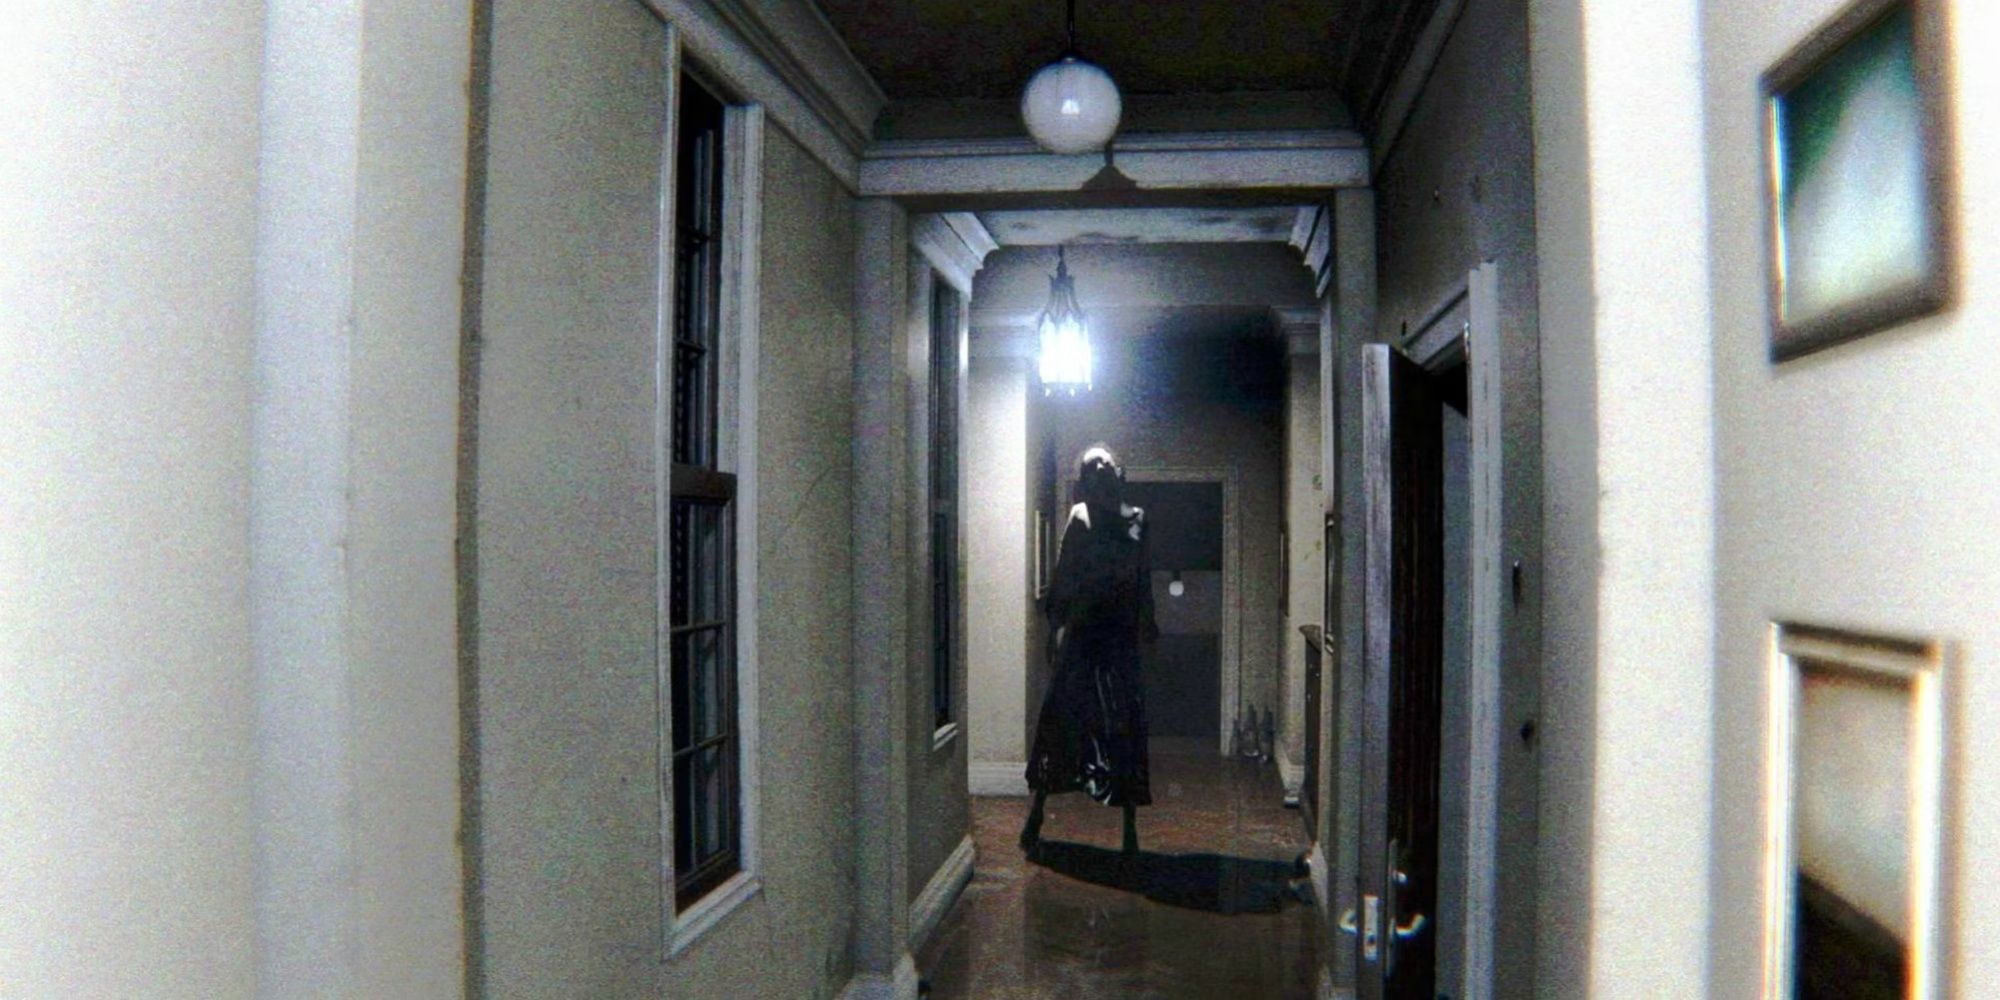 P.T. - Lisa stands in a narrow corridor